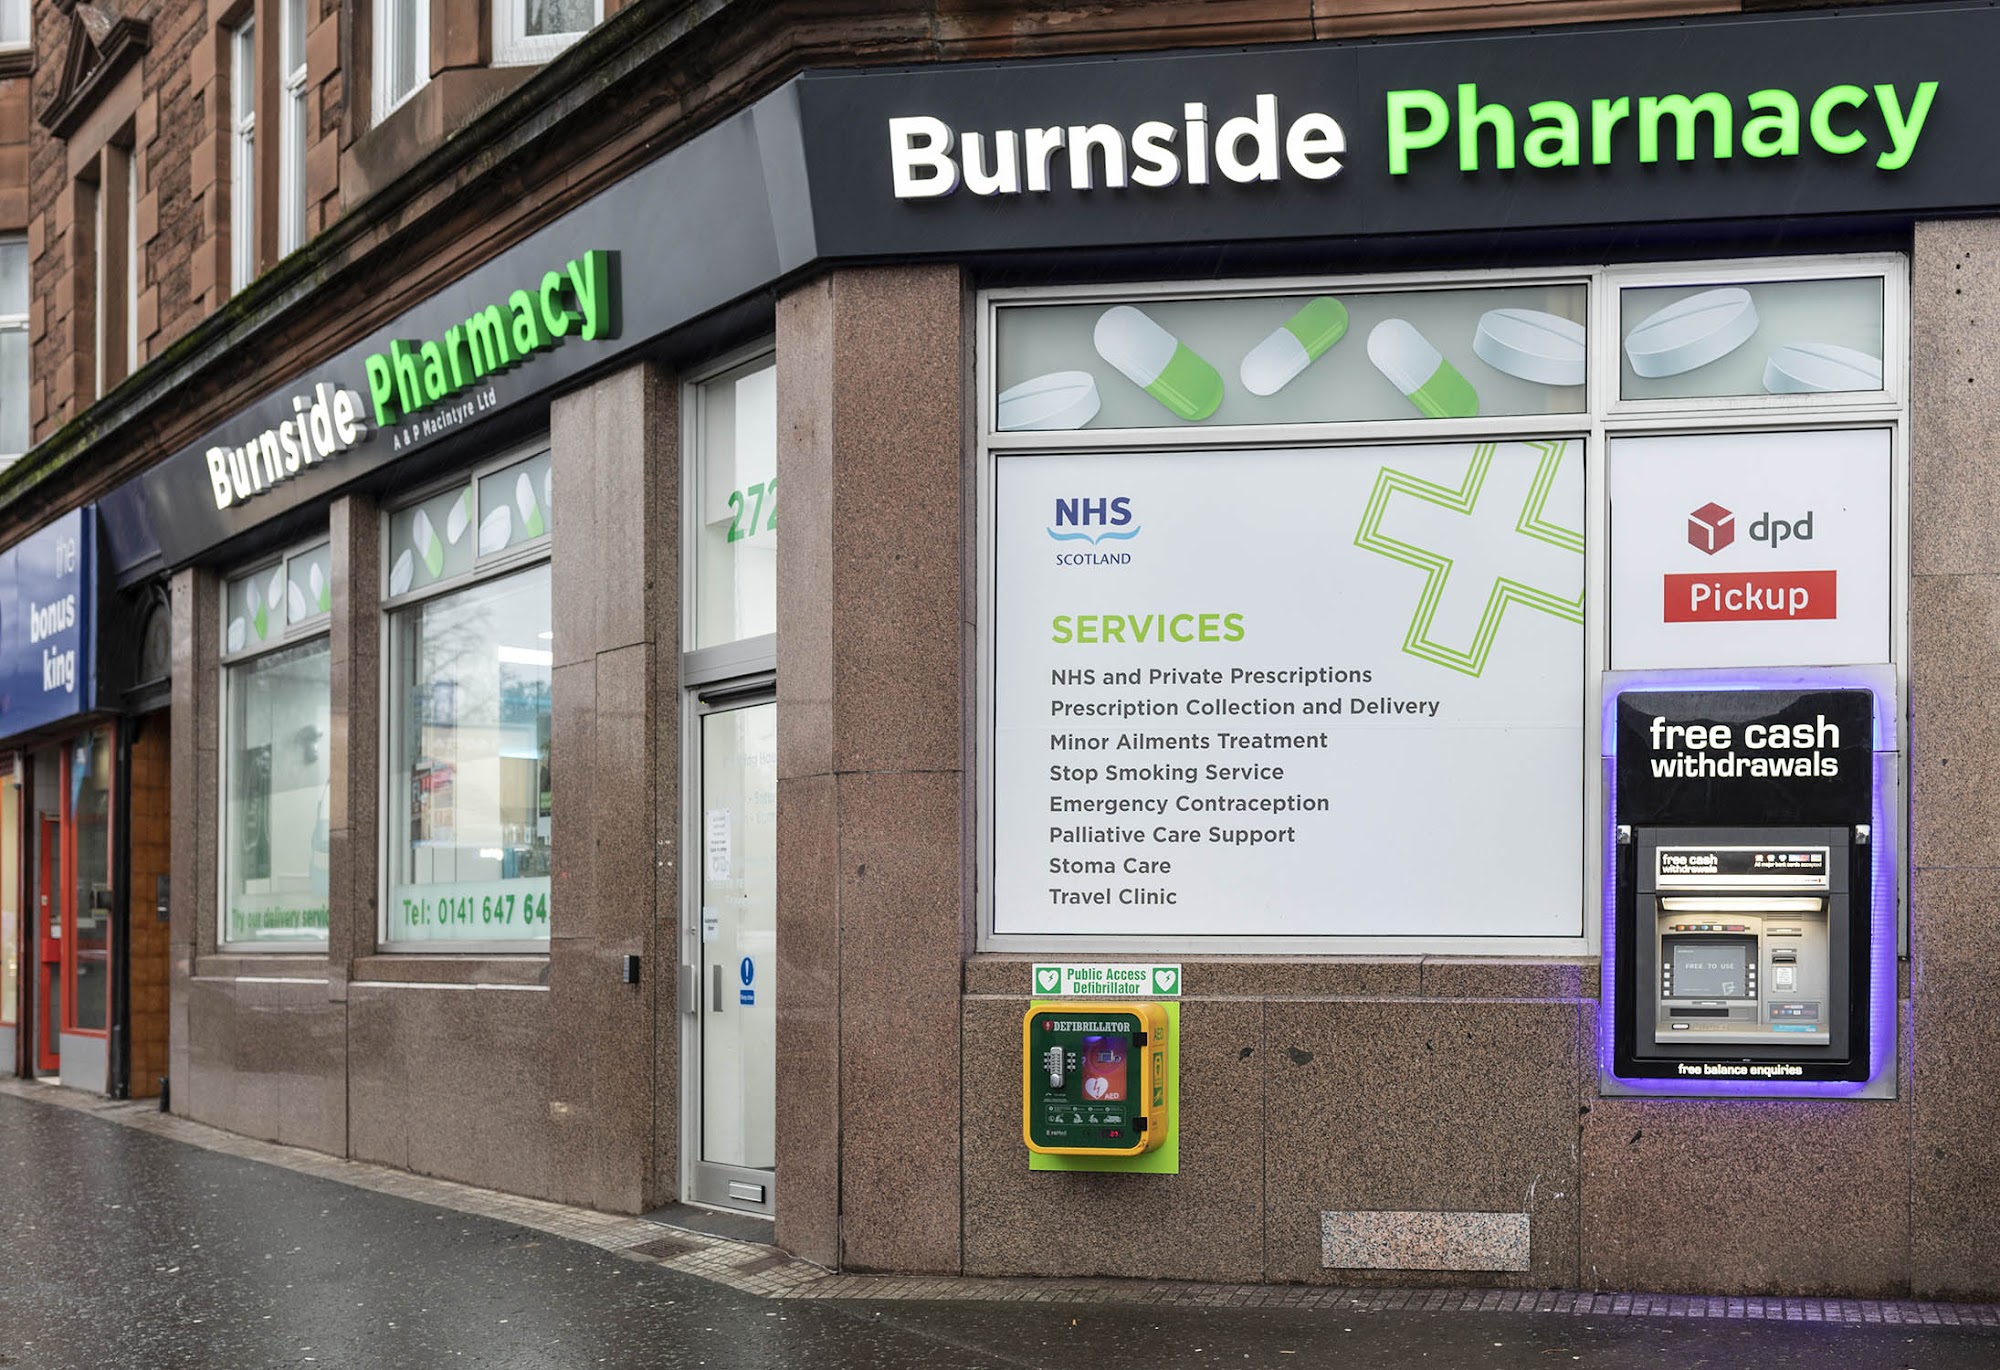 Burnside Pharmacy and Travel Clinic. DPD pickup and drop off point.